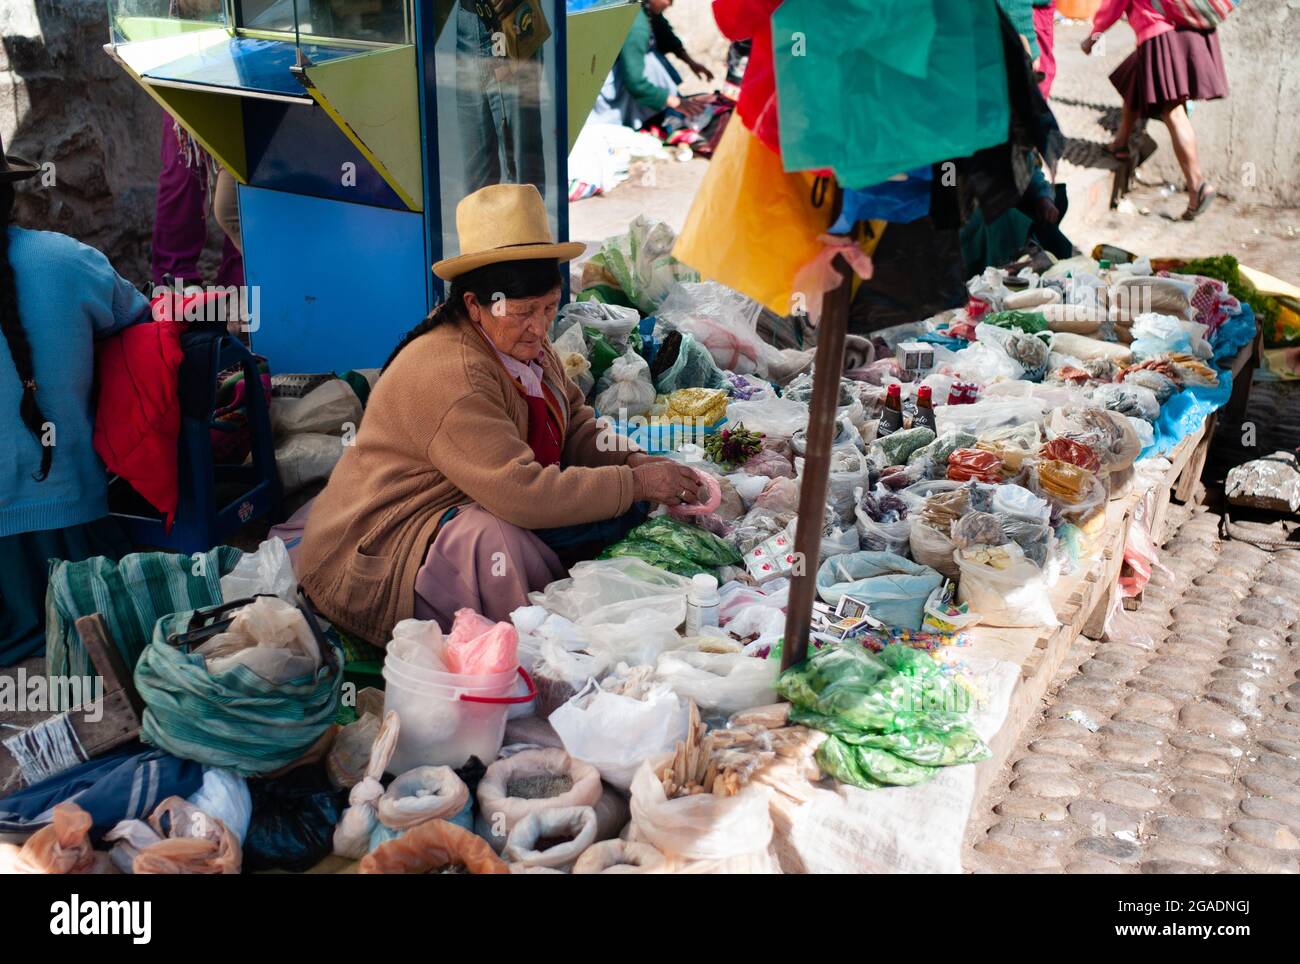 Pisac, Peru - July 29 2010: Elderly Local Woman Selling Spices at the Open Air Market. Stock Photo